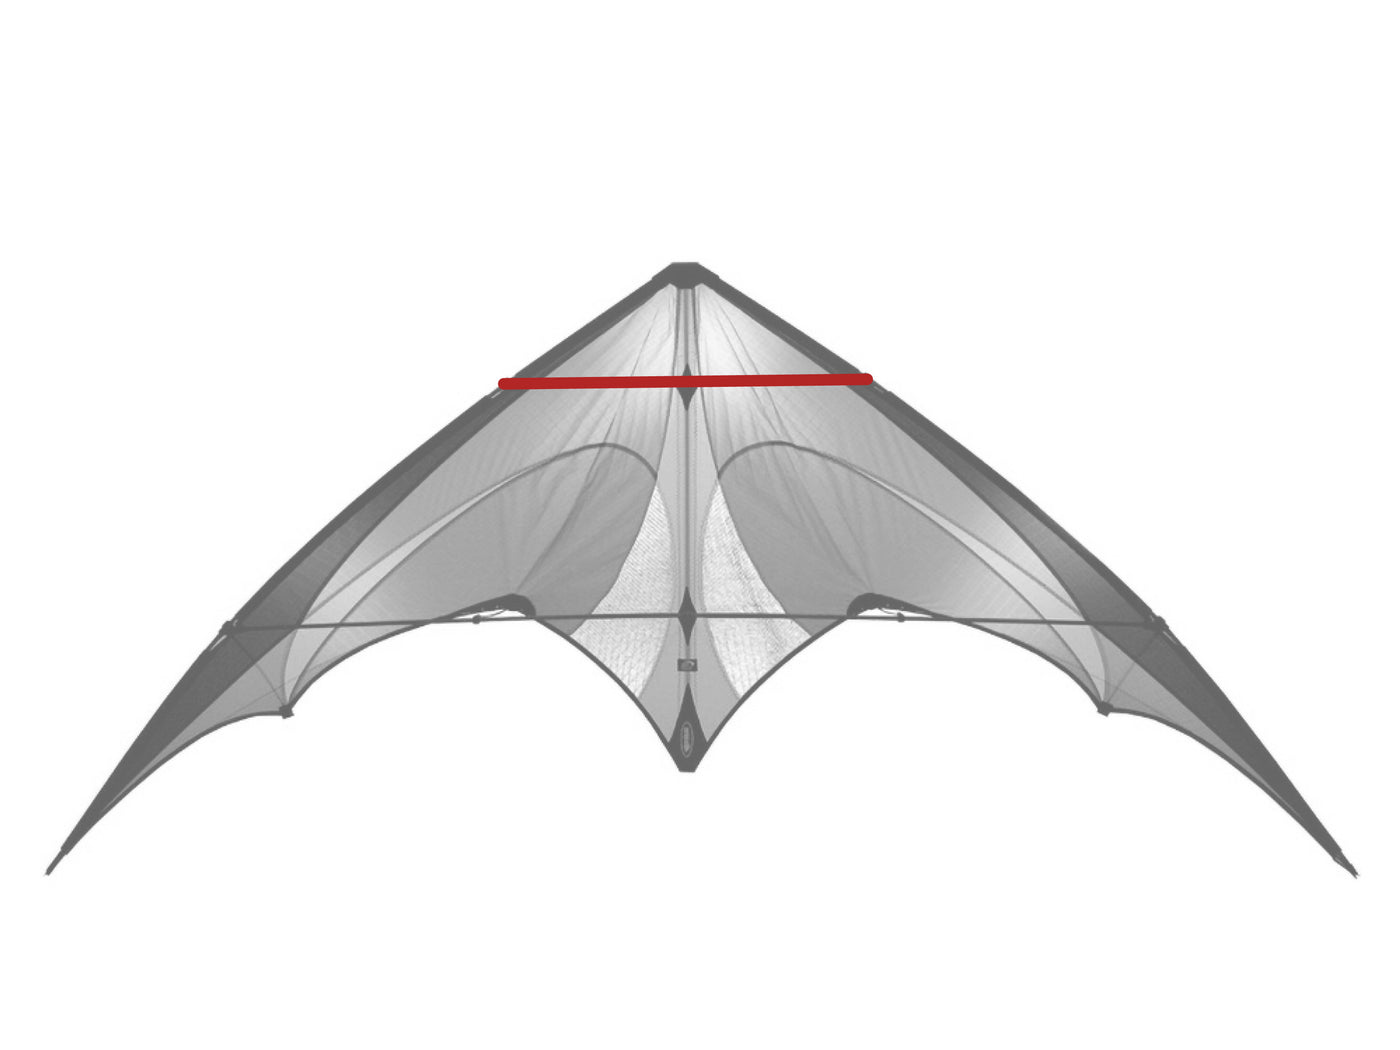 Diagram showing location of the E2 Upper Spreader on the kite.